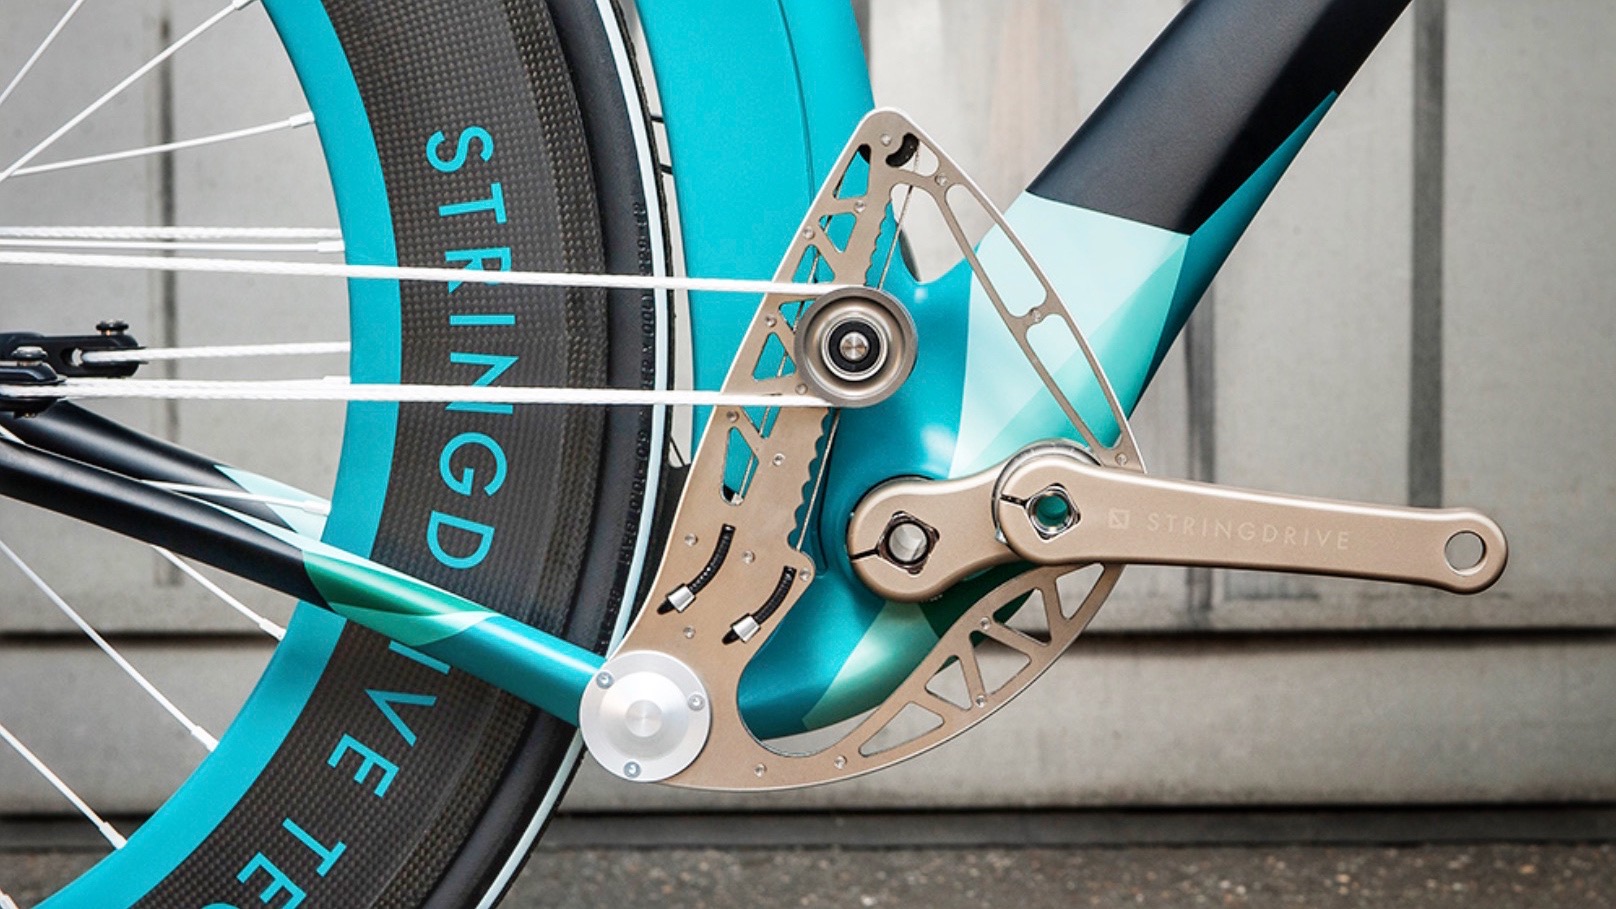 the stringbike uses a rope and pulley drive system instead of a traditional  chain